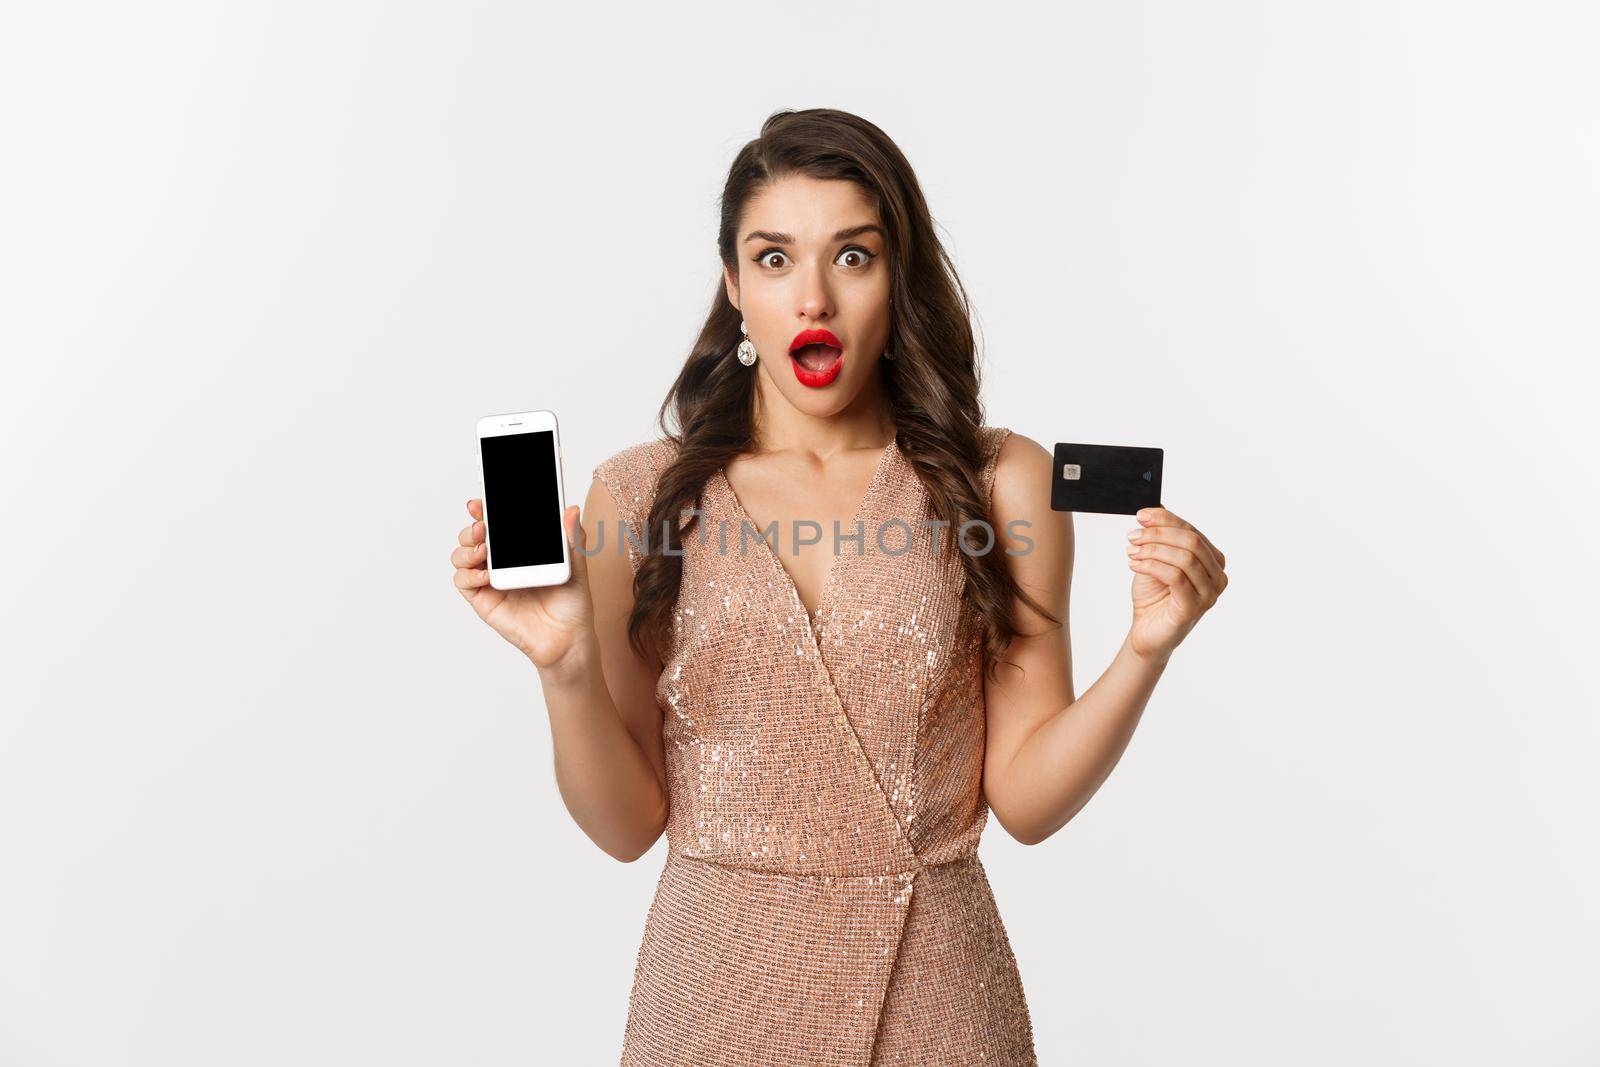 Online shopping and holidays concept. Woman looking amazed and showing credit card with smartphone screen, standing over white background.